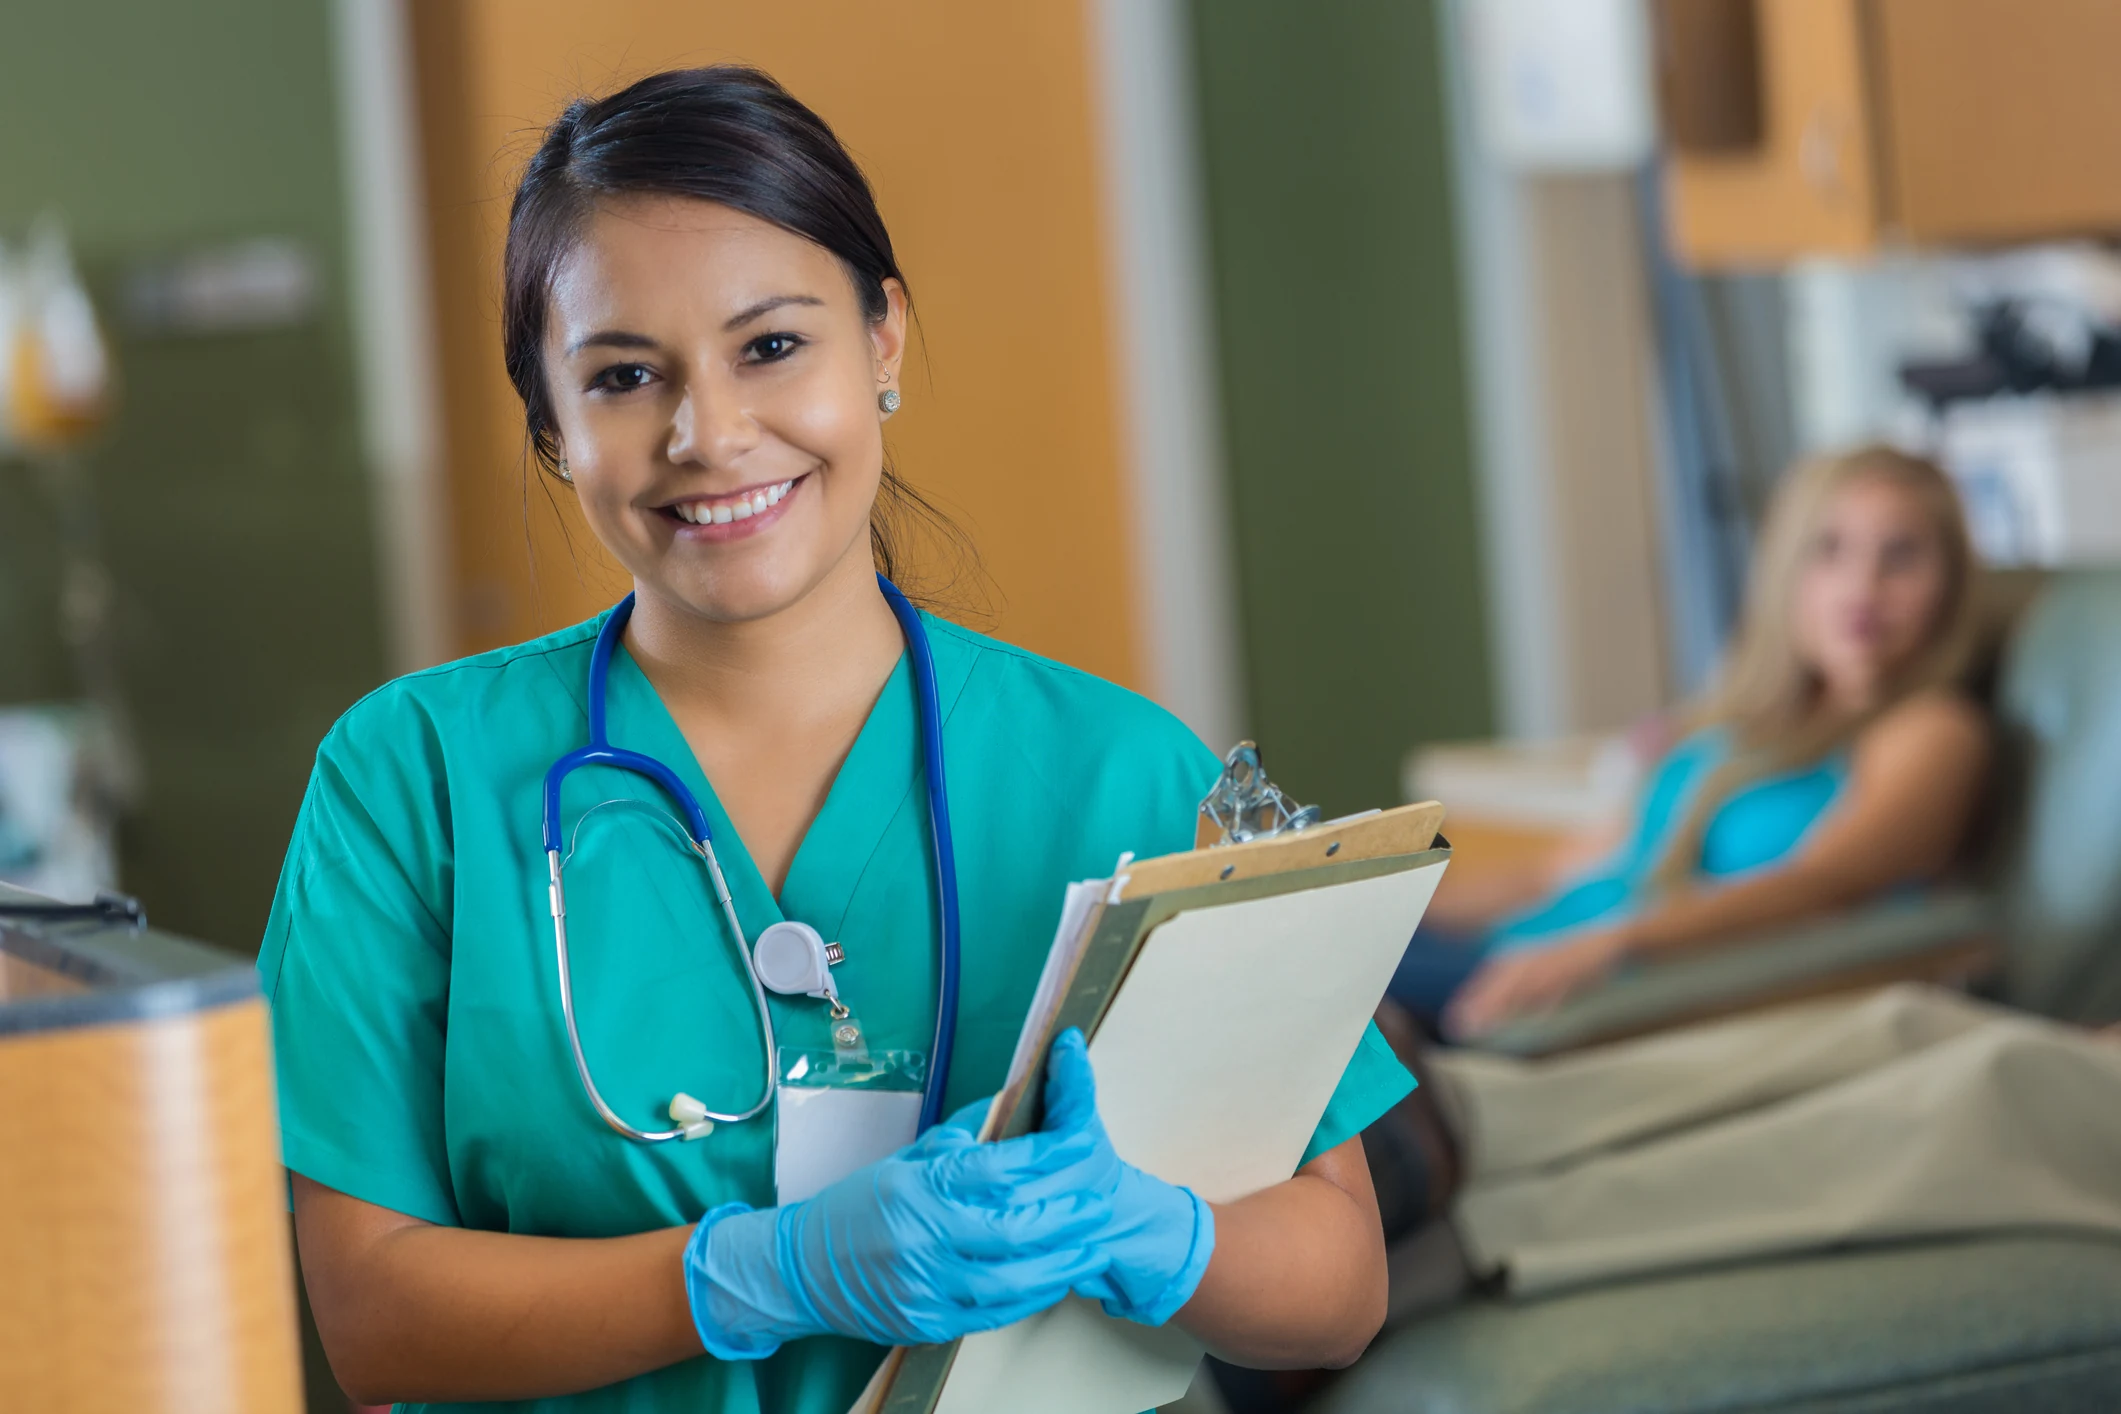 Highest paying civilian jobs after military - Registered nurse